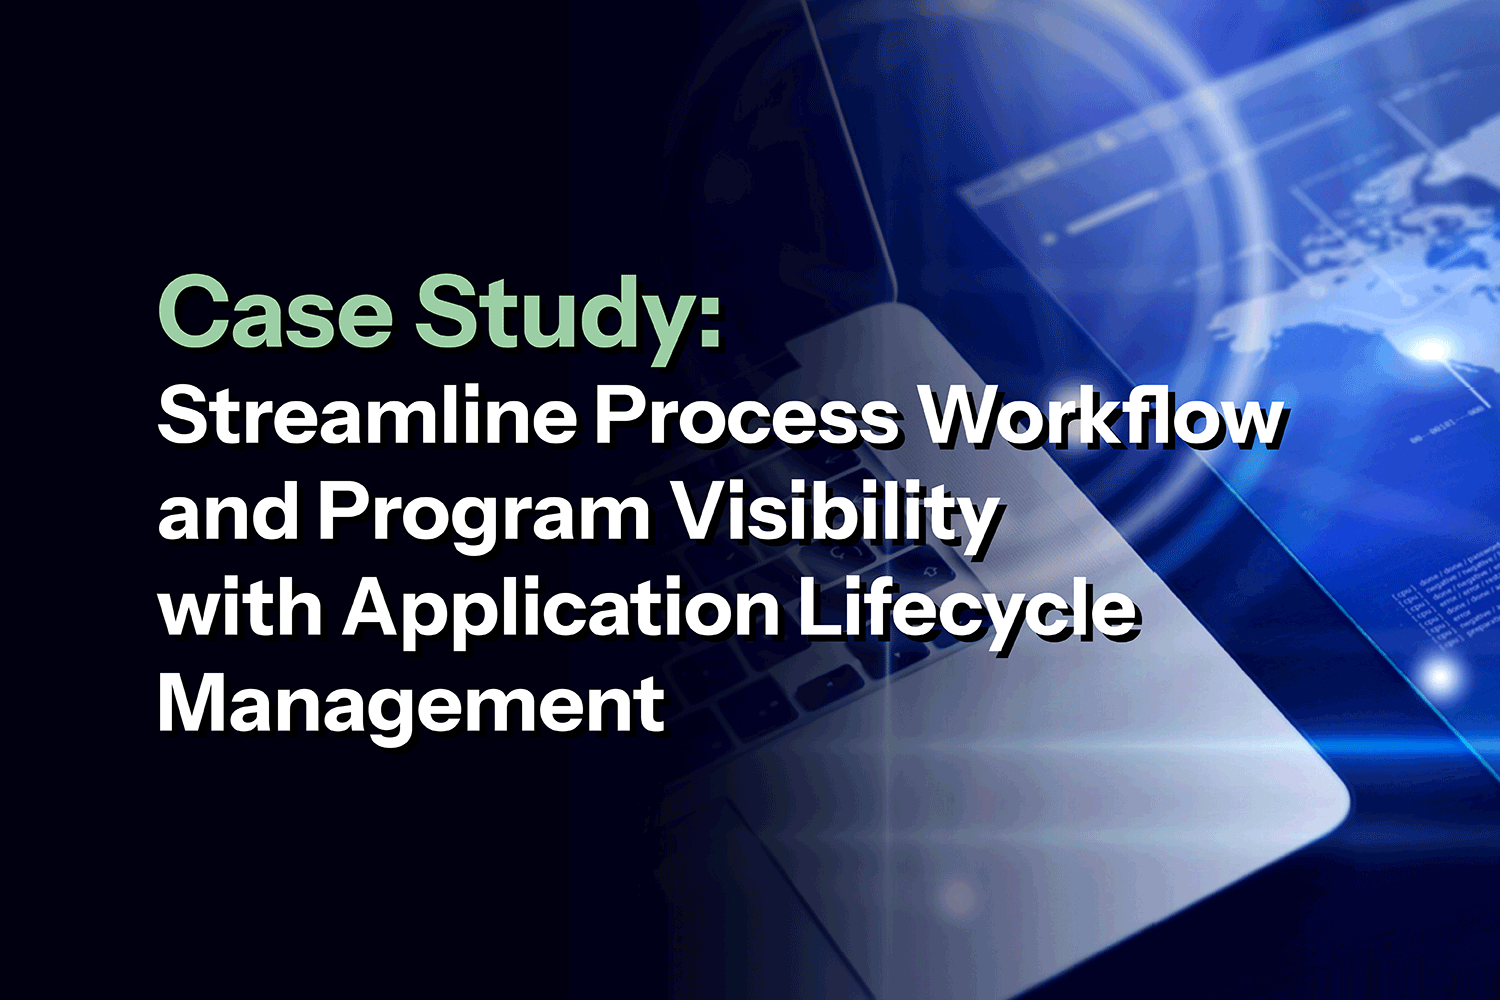 LSS-Knowledge-Center-Case-Study-Streamline Process Workflow(...)-Card-Images-01